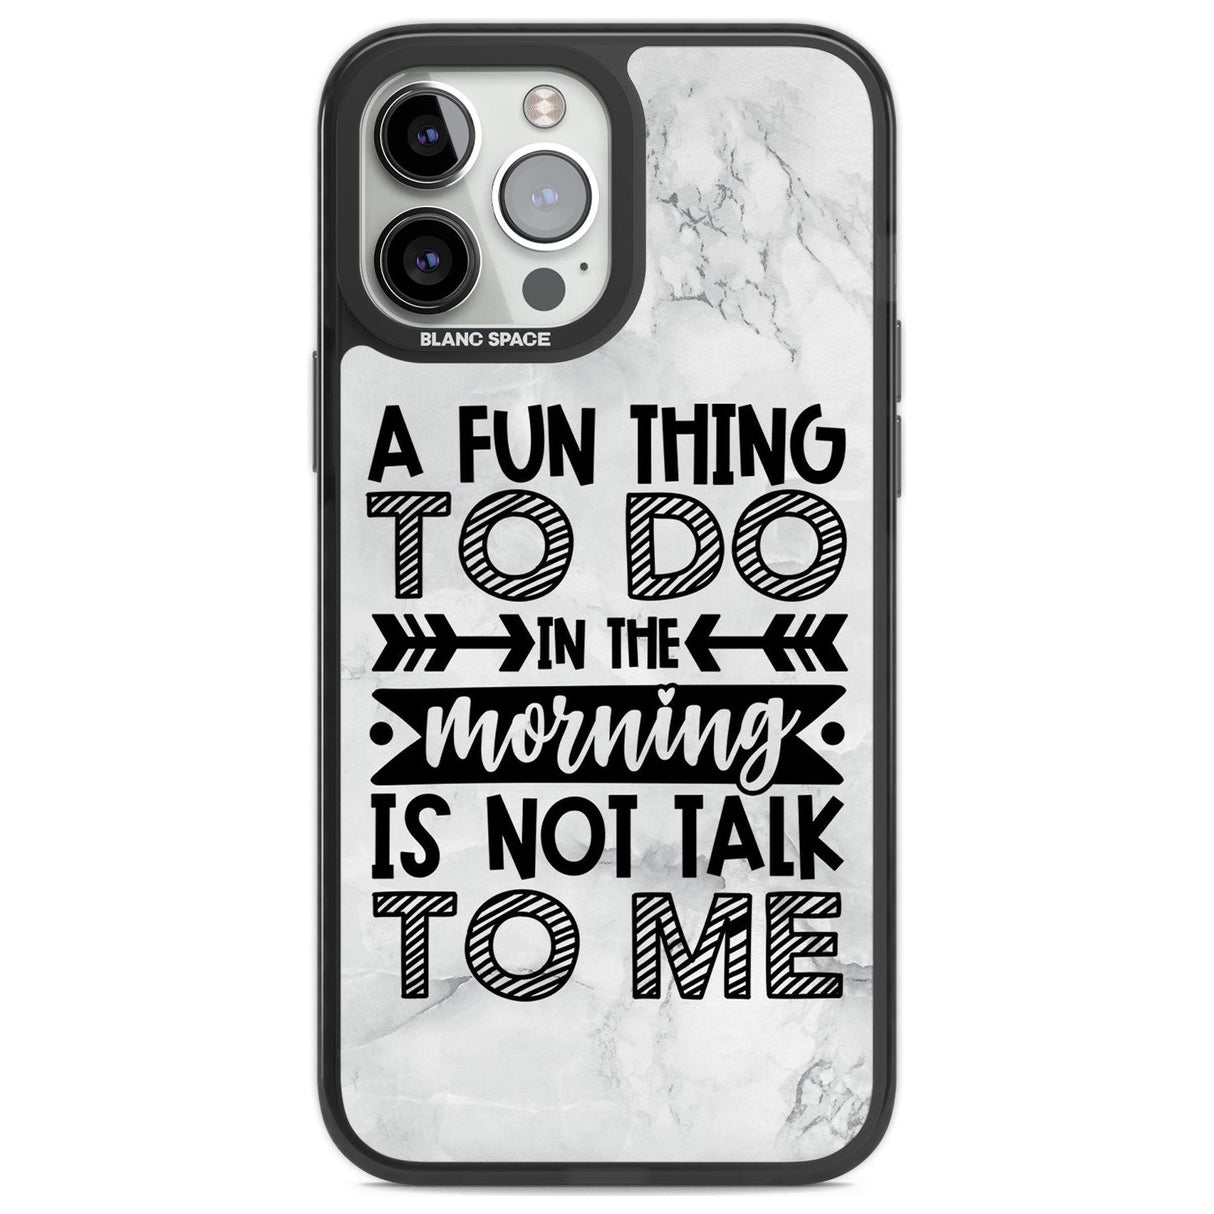 A Fun thing to do Phone Case iPhone 14 Pro Max / Black Impact Case,iPhone 13 Pro Max / Black Impact Case Blanc Space